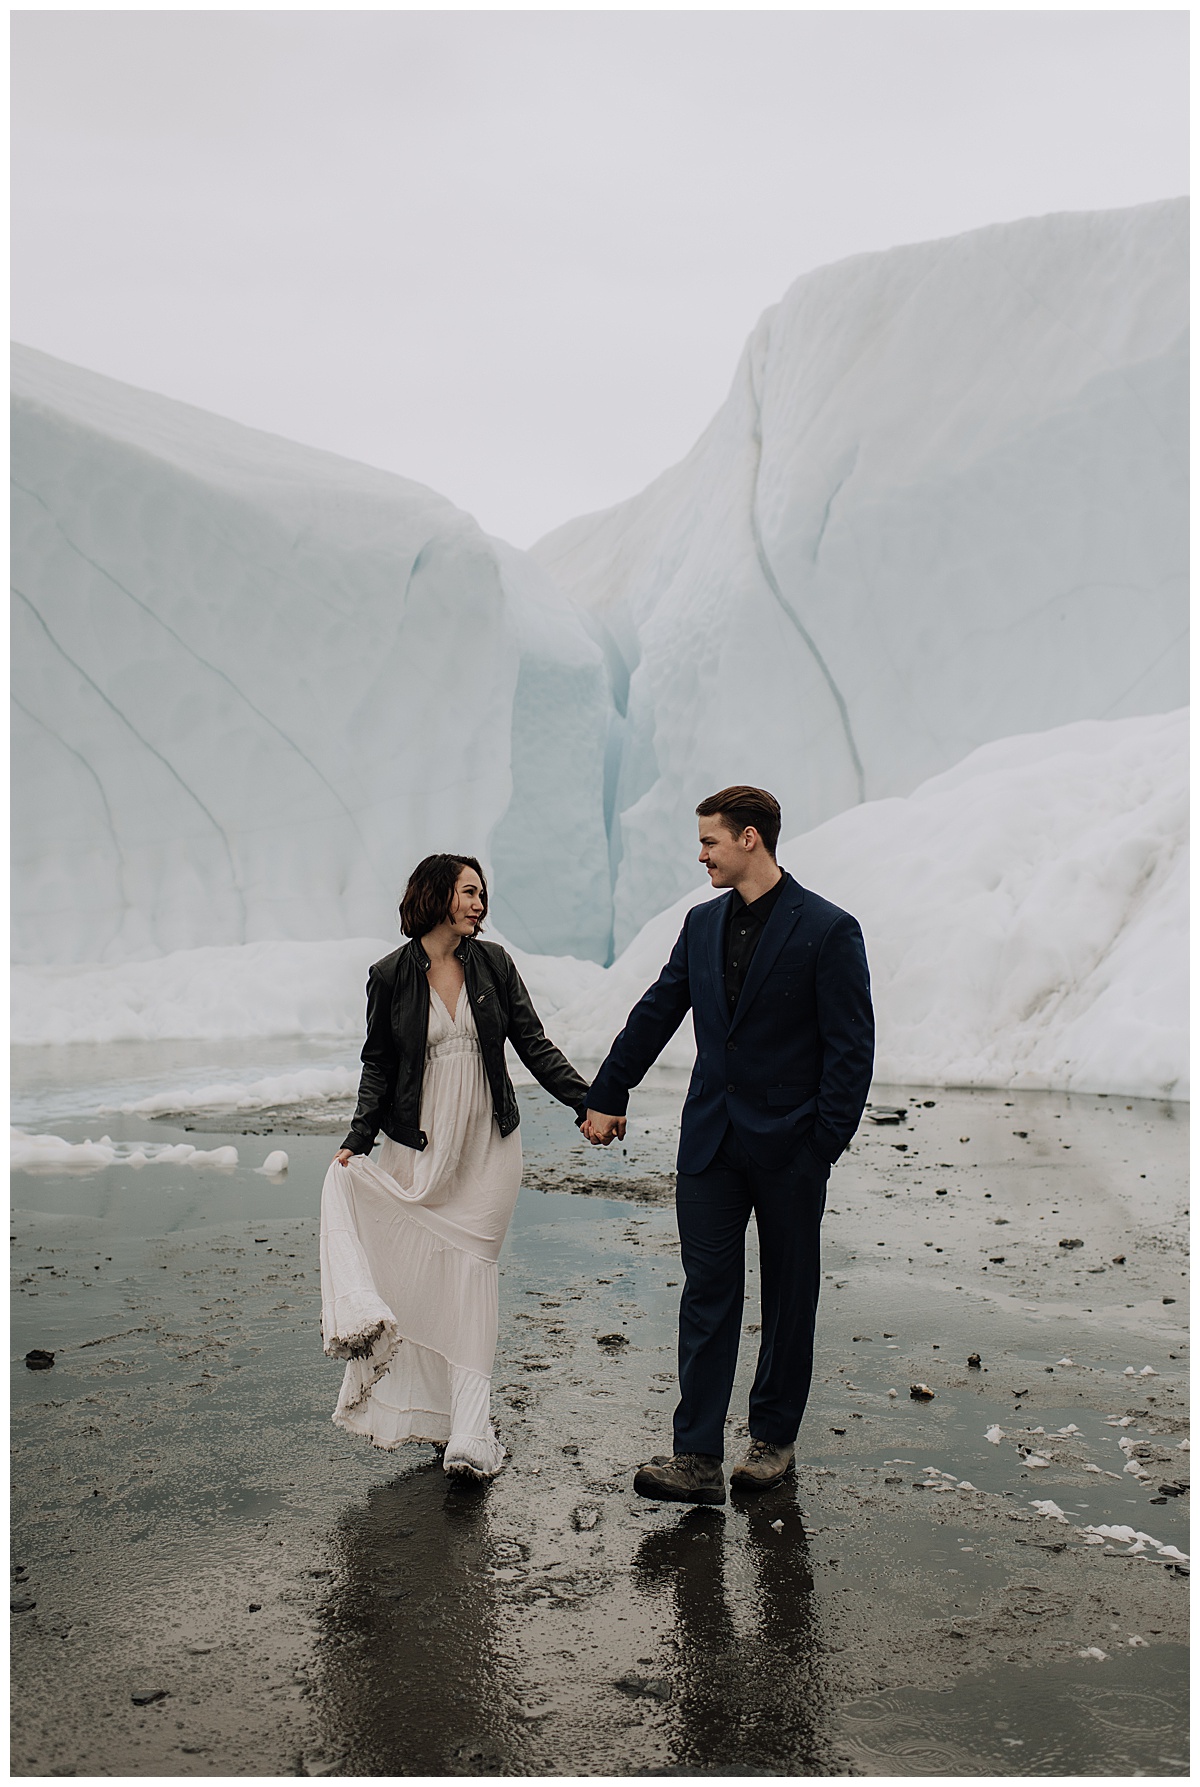 how to elope in alaska an epic adventure elopement planning guide